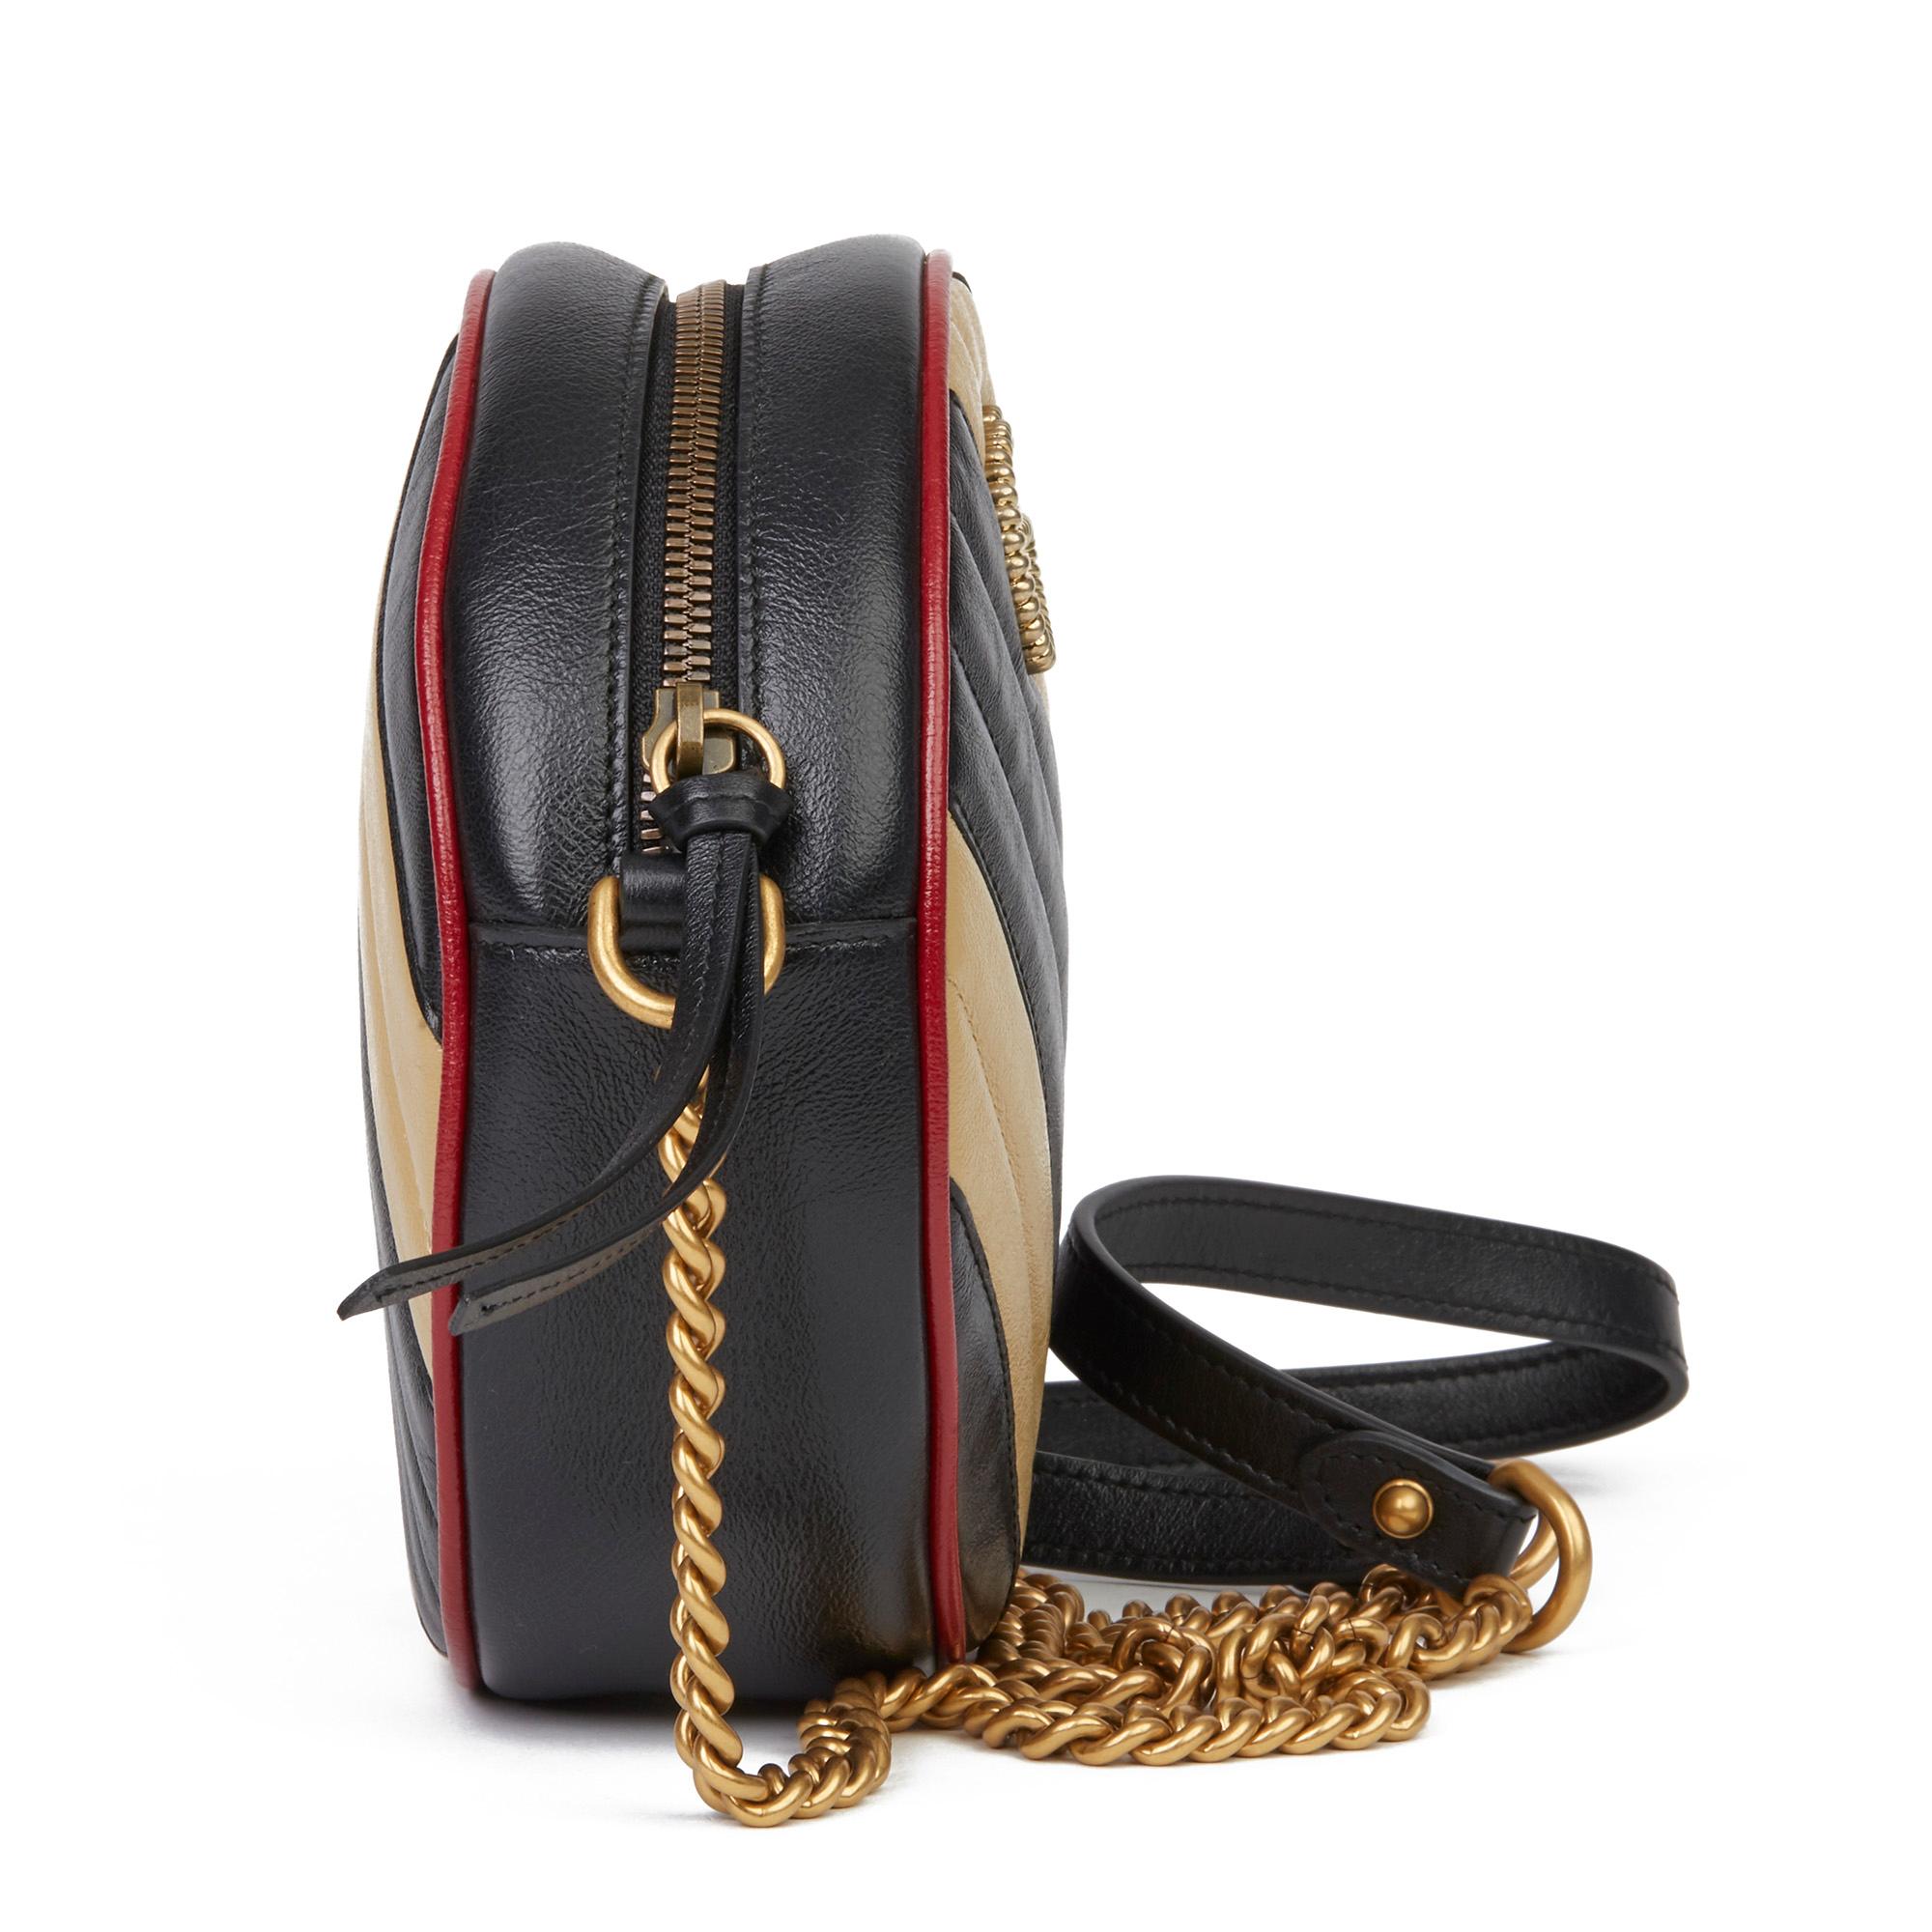 GUCCI
Black, Cream & Red Diagonal Quilted Aged Calfskin Leather Mini Round Marmont

Xupes Reference: HB3536
Serial Number: 550154 001998
Age (Circa): 2020
Accompanied By: Gucci Dust Bag
Authenticity Details: Serial Stamp (Made in Italy)
Gender: